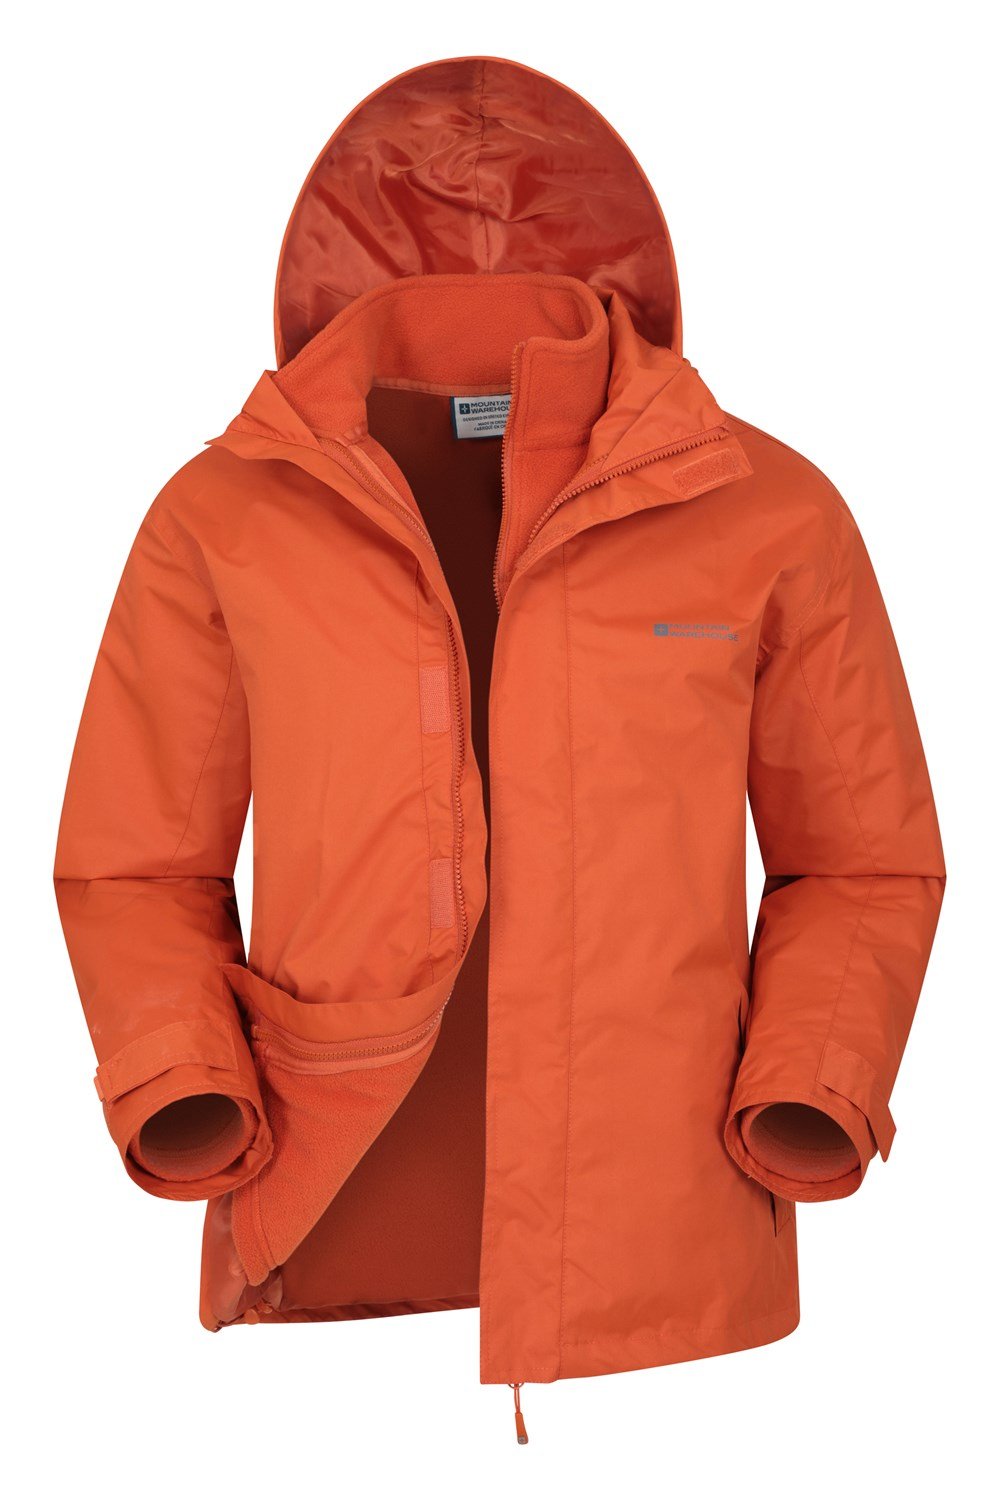 Winter Mountain Warehouse Fell Mens 3 in 1 Water Resistant Jacket 